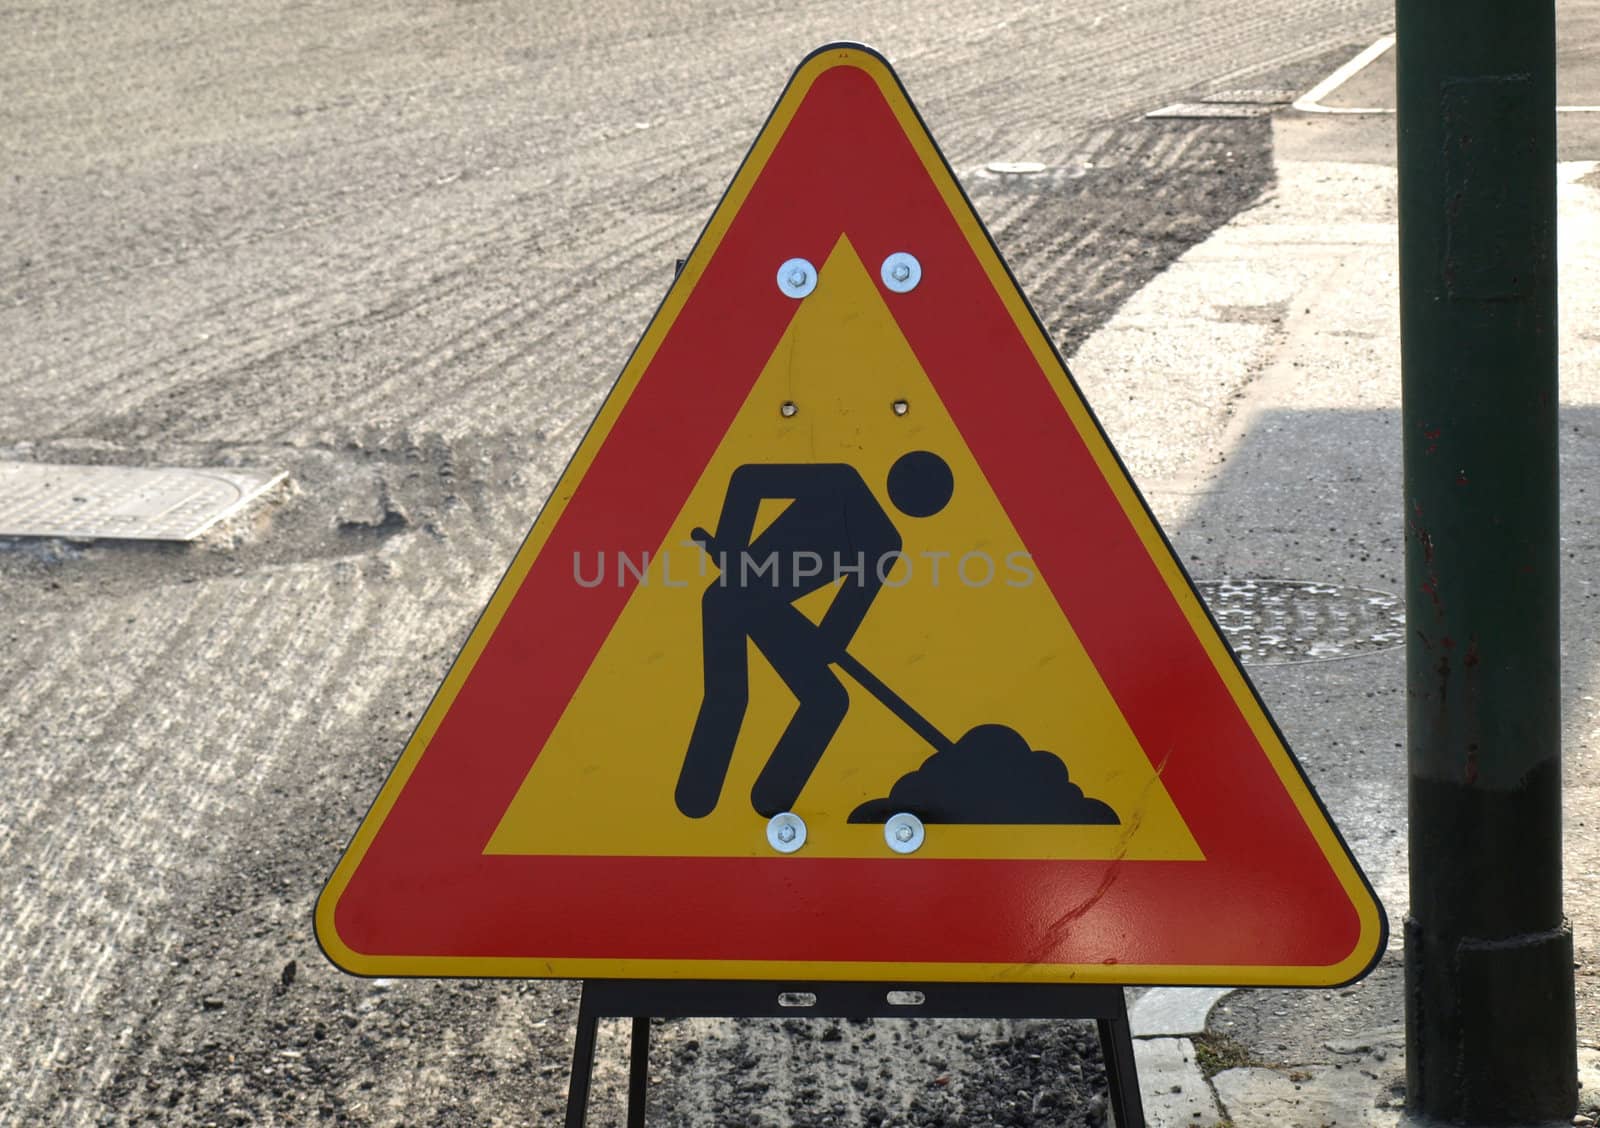 Road works with traffic sign